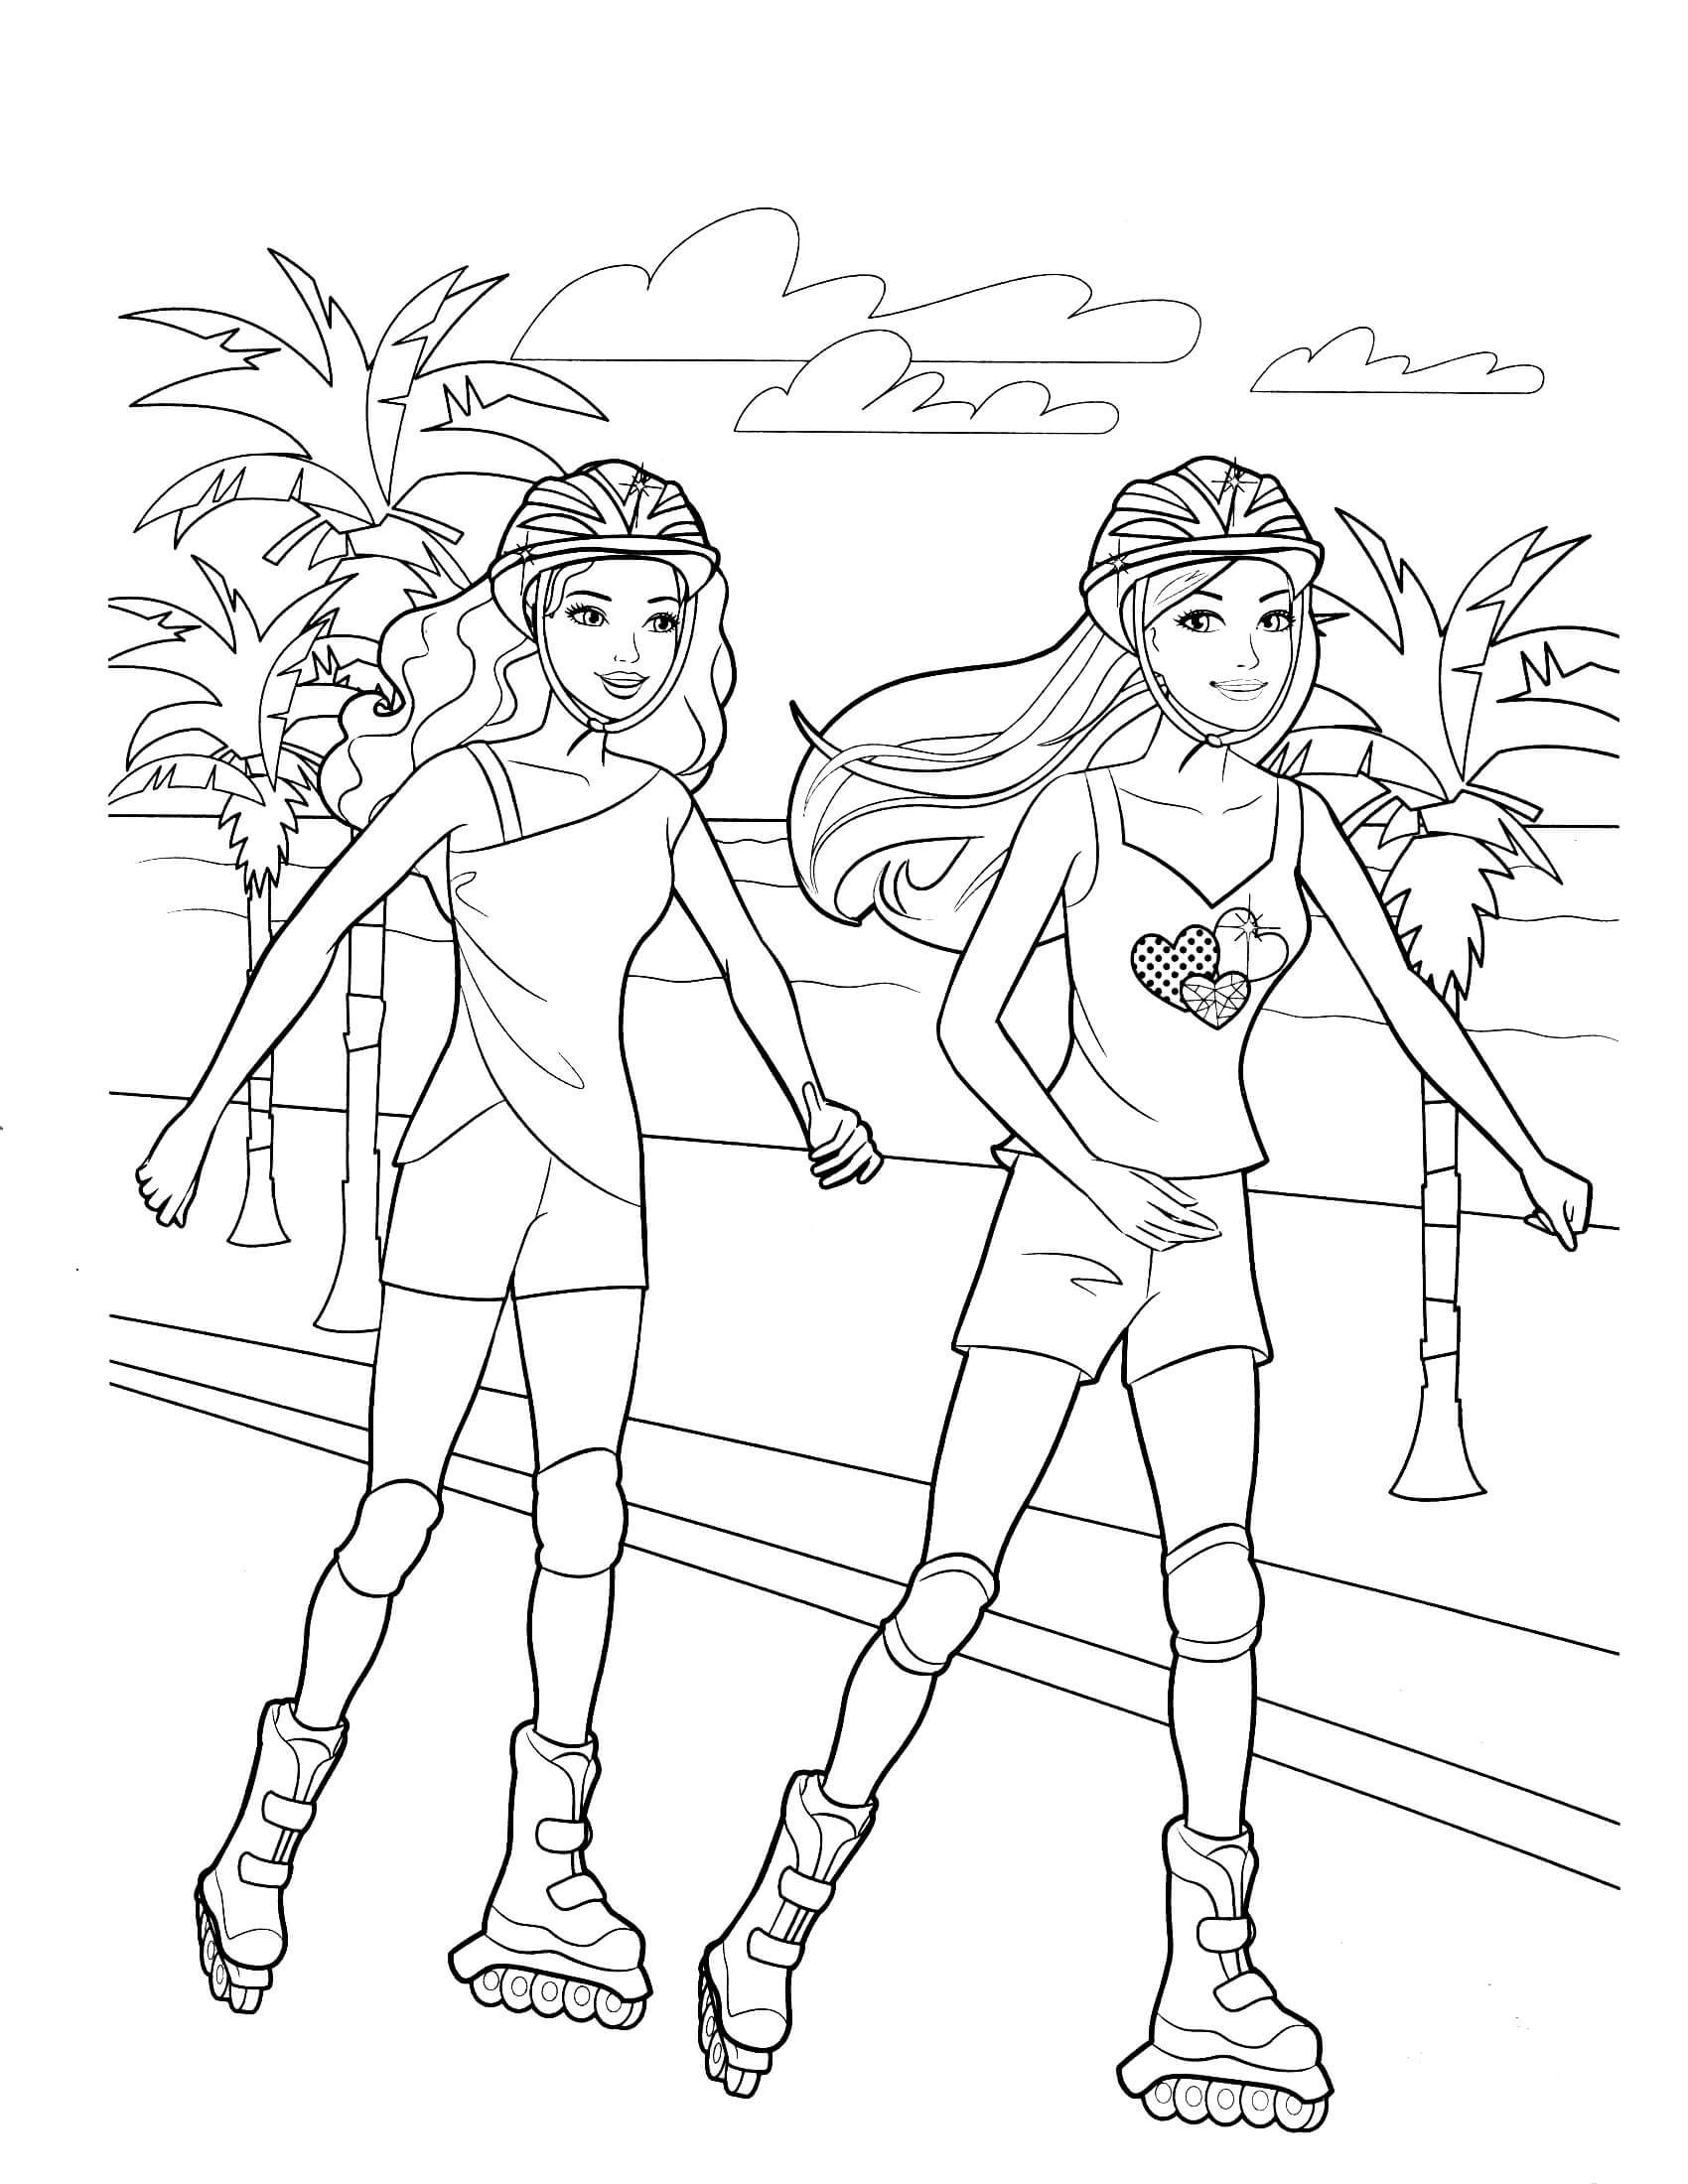 Printable Barbie And Friends Coloring Pages Pdf - Barbie And Friends Coloring Pages Free